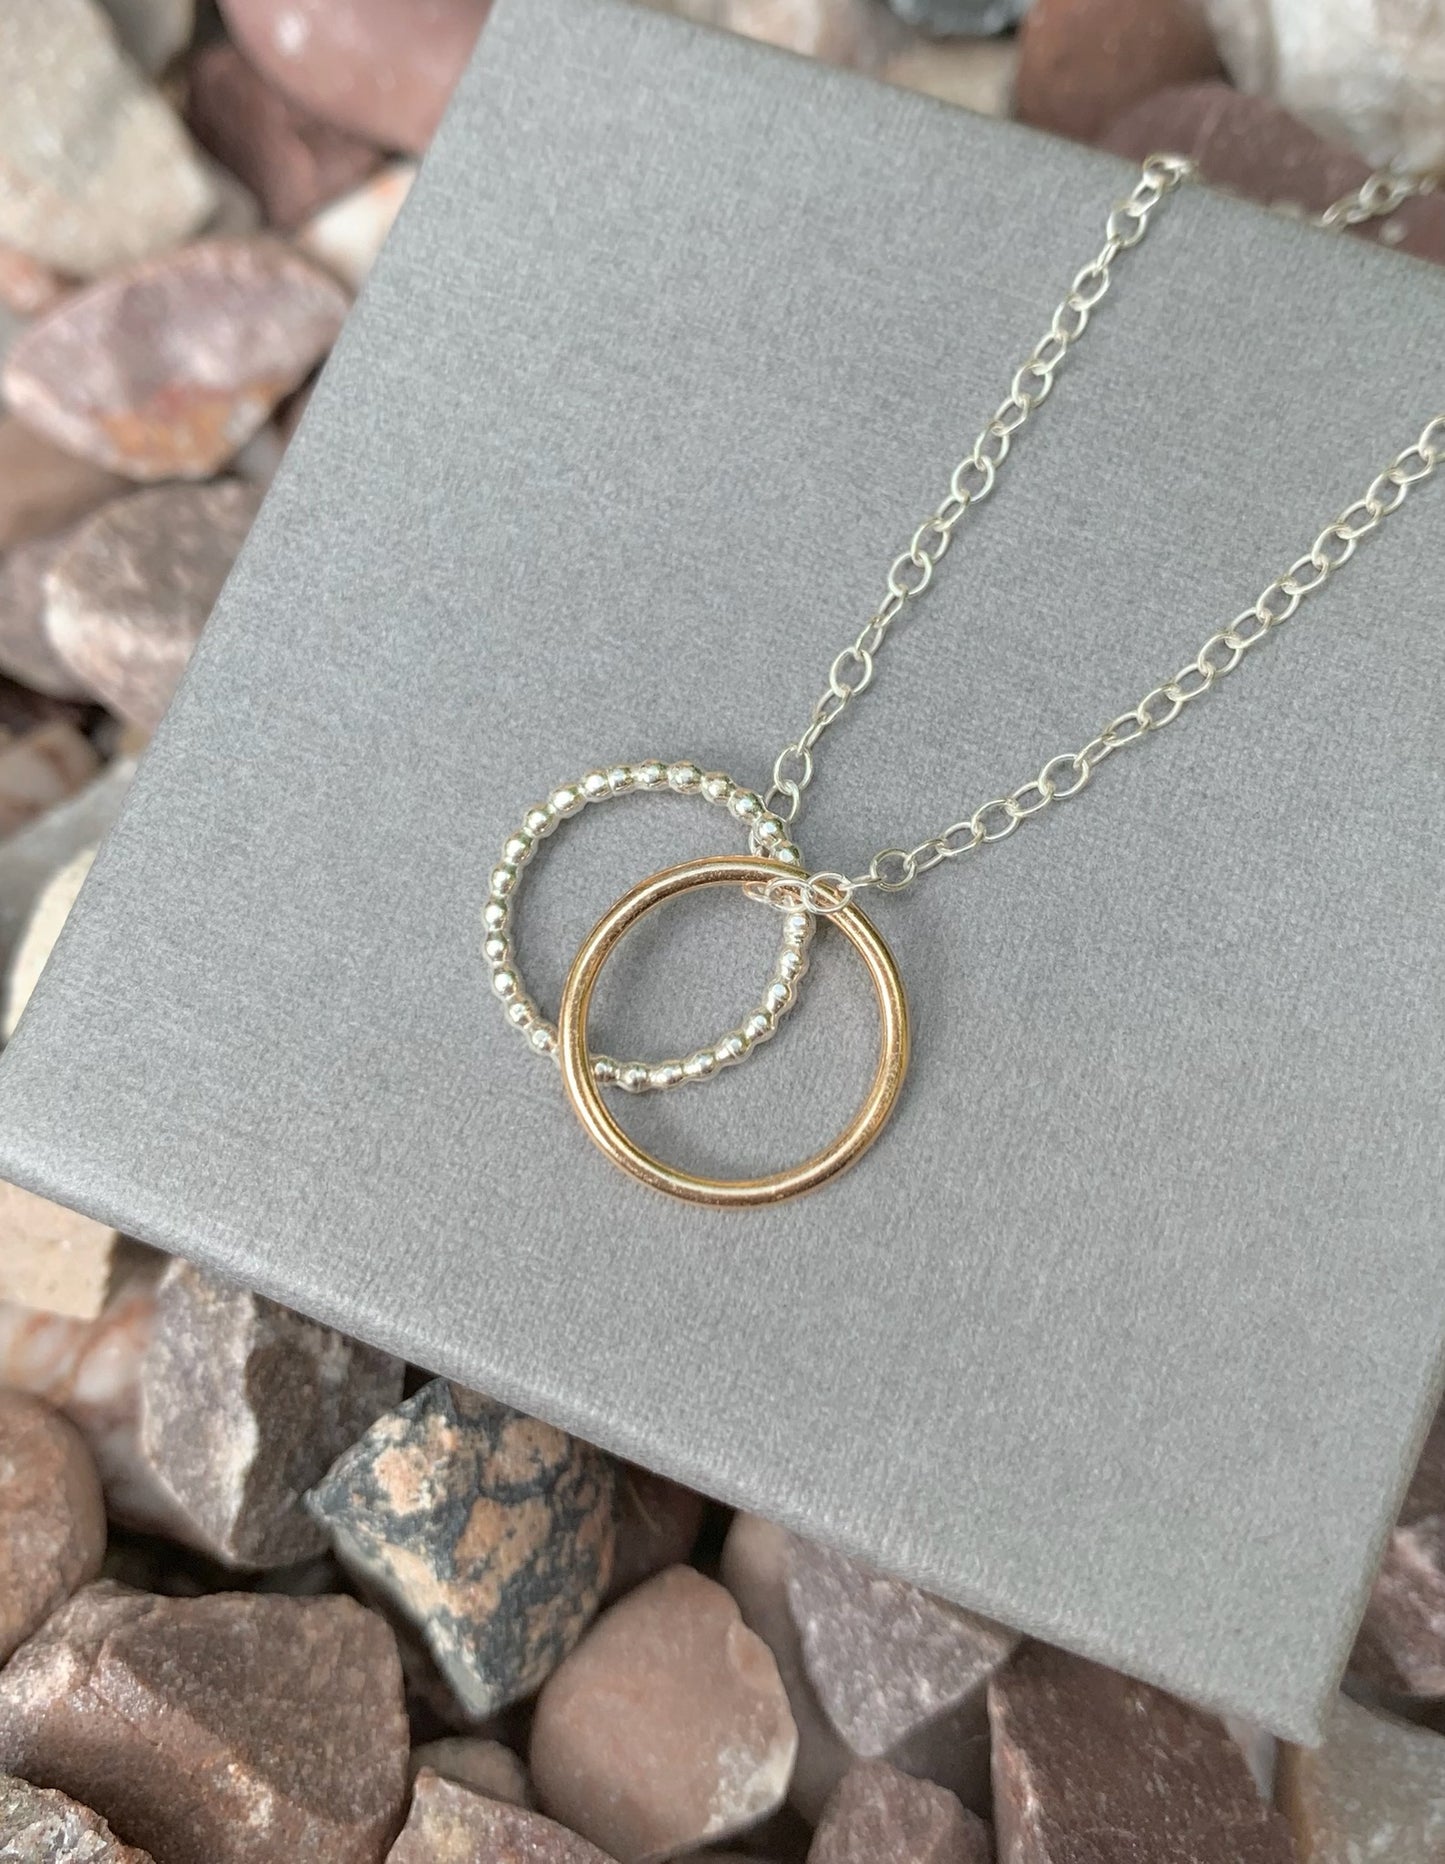 Gold and silver rings necklace